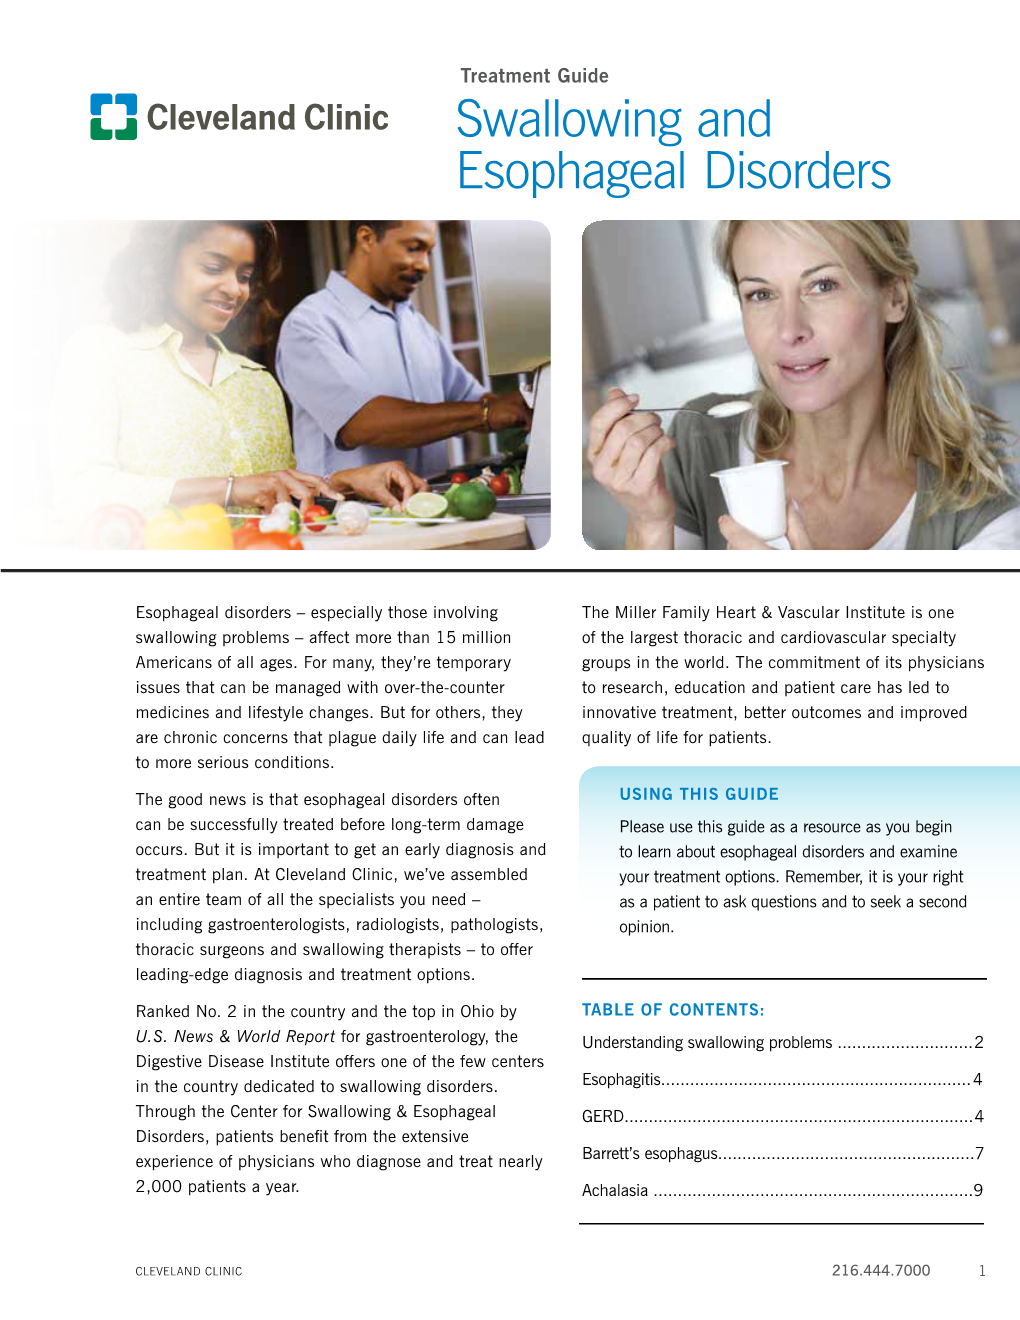 Swallowing and Esophageal Disorders